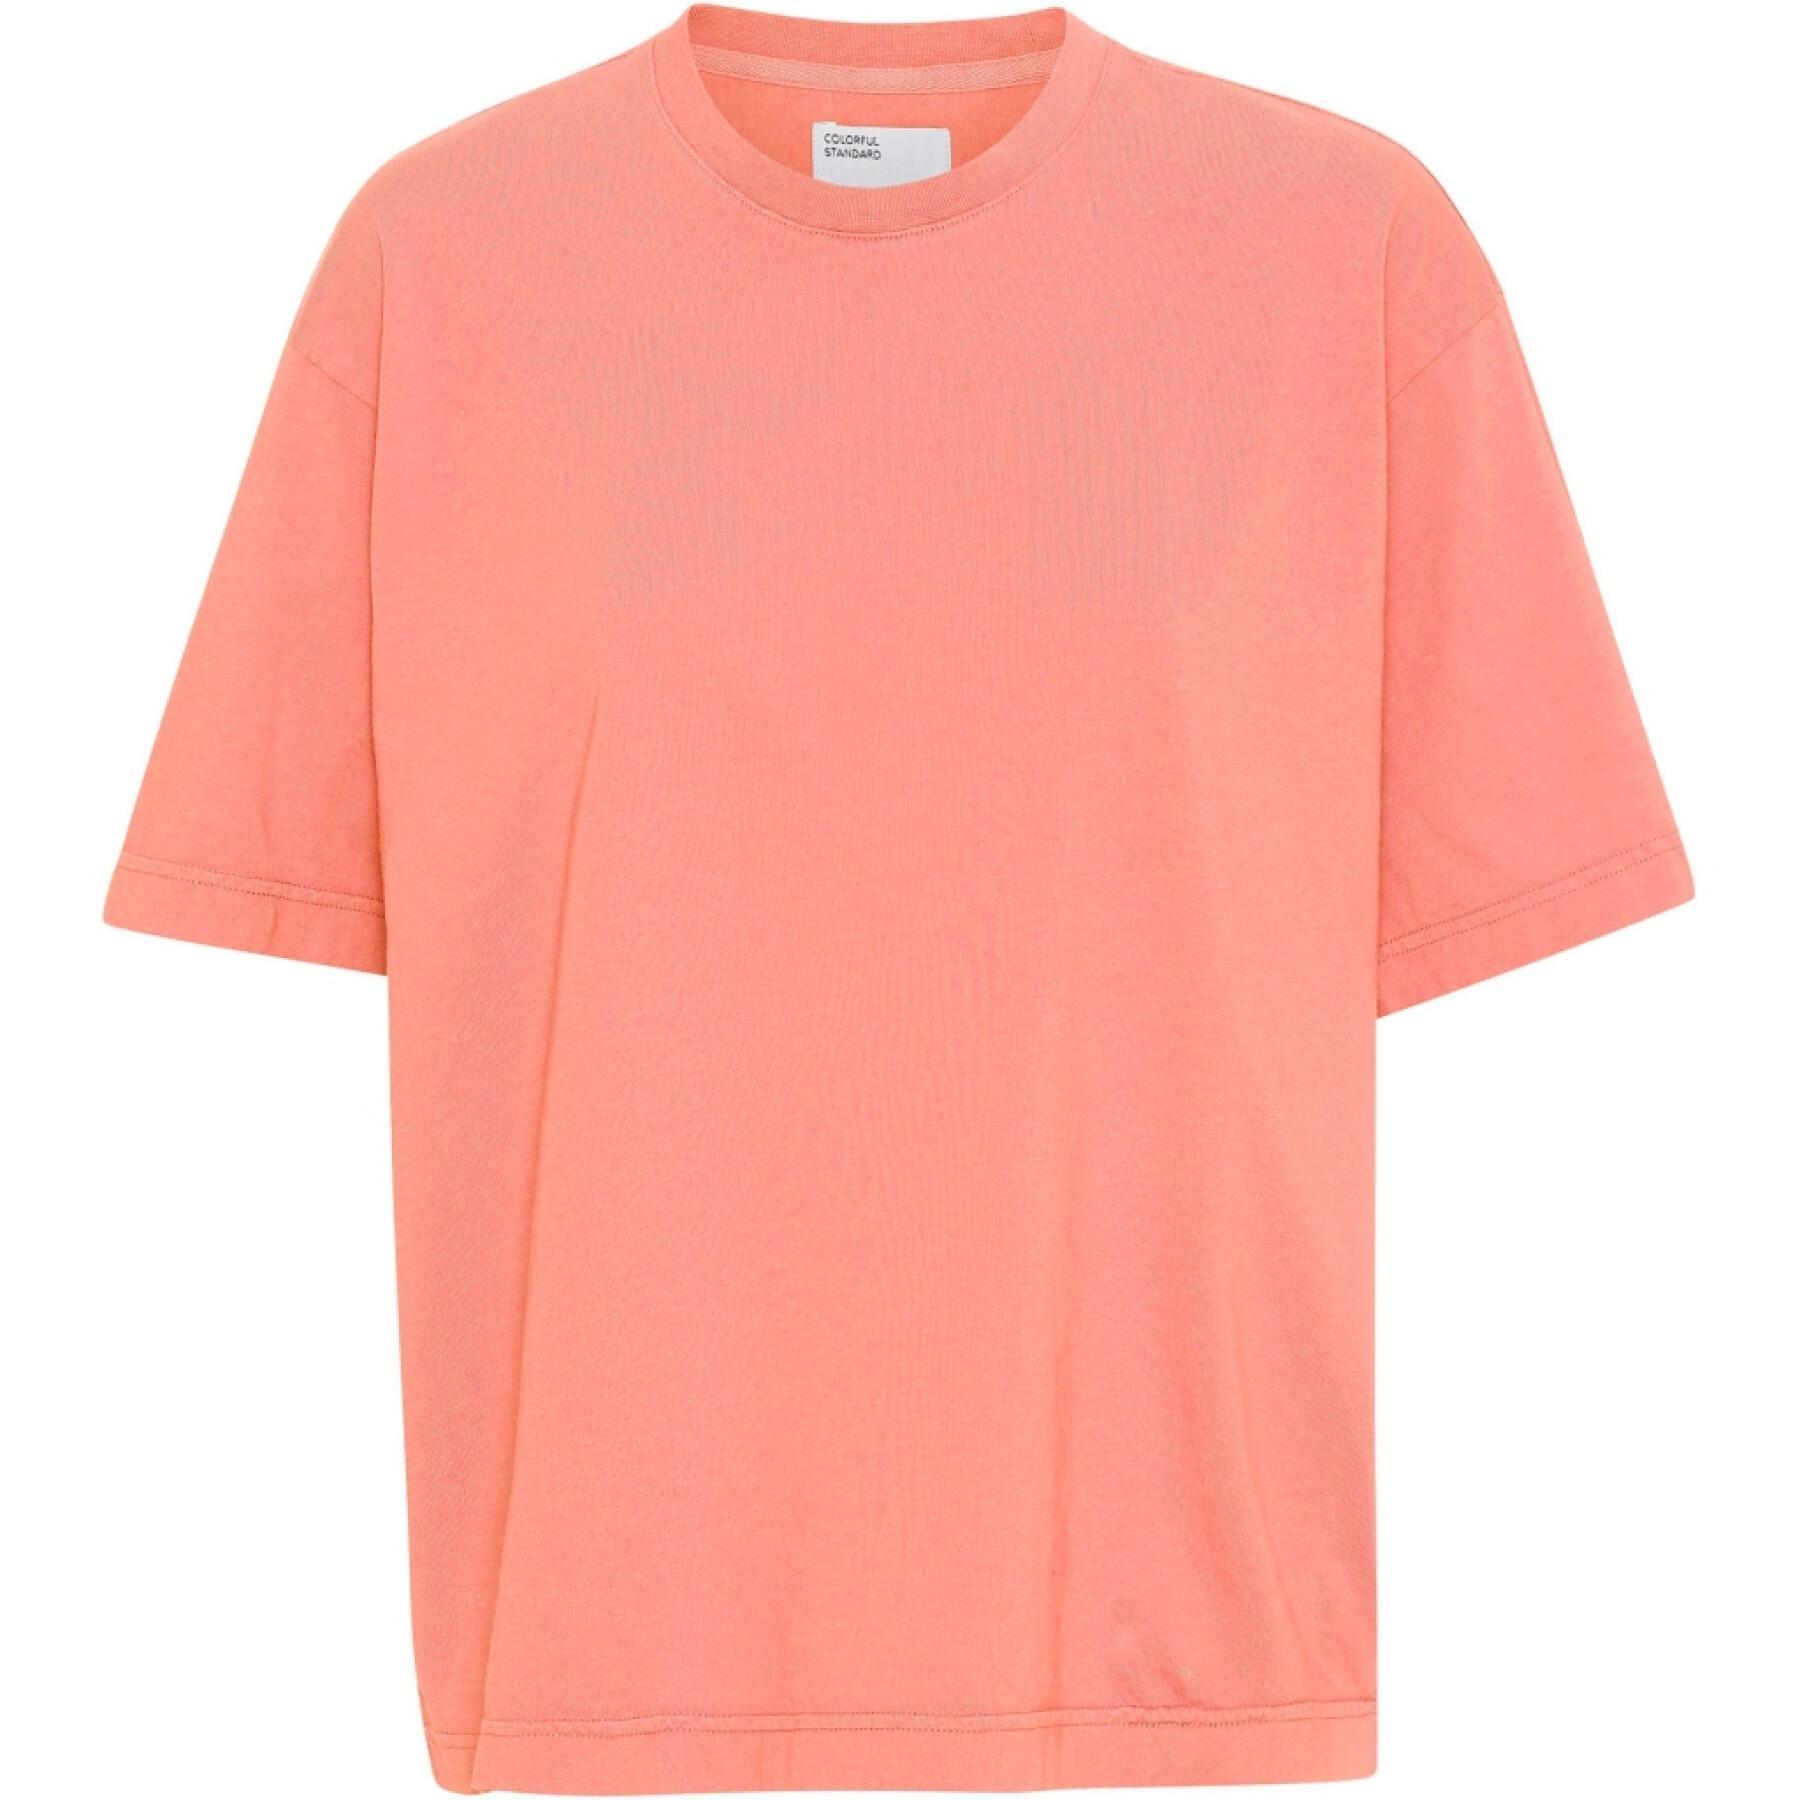 Women's T-shirt Colorful Standard Organic oversized bright coral